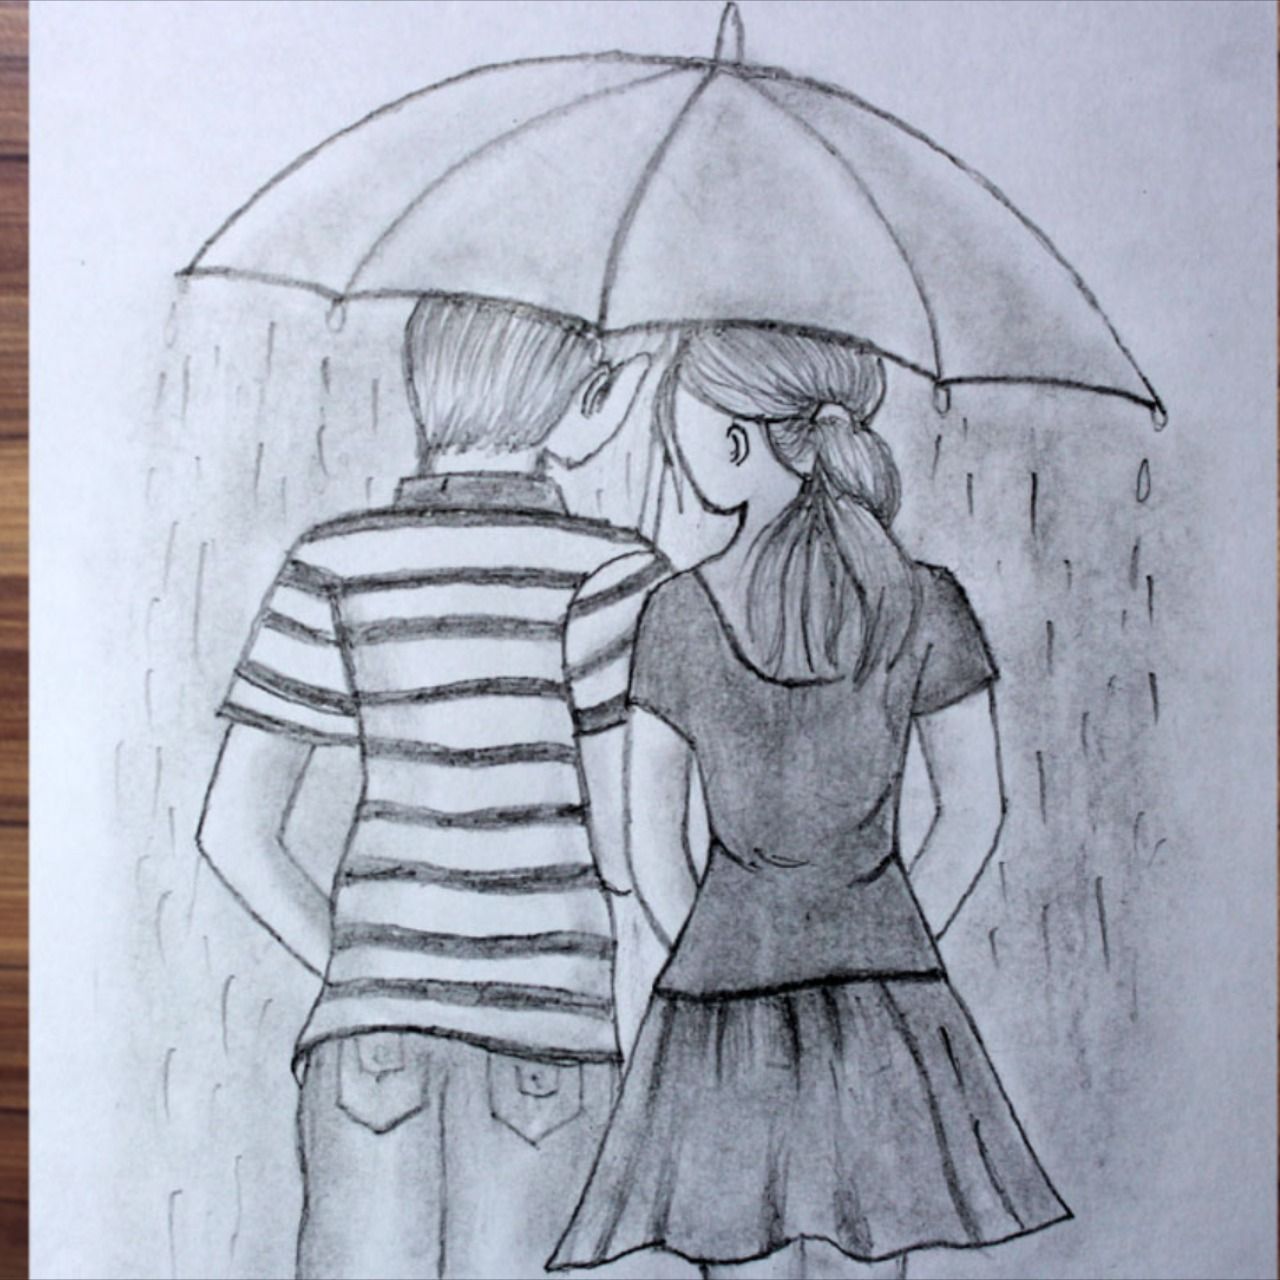 Cute Couple Drawing Wallpapers